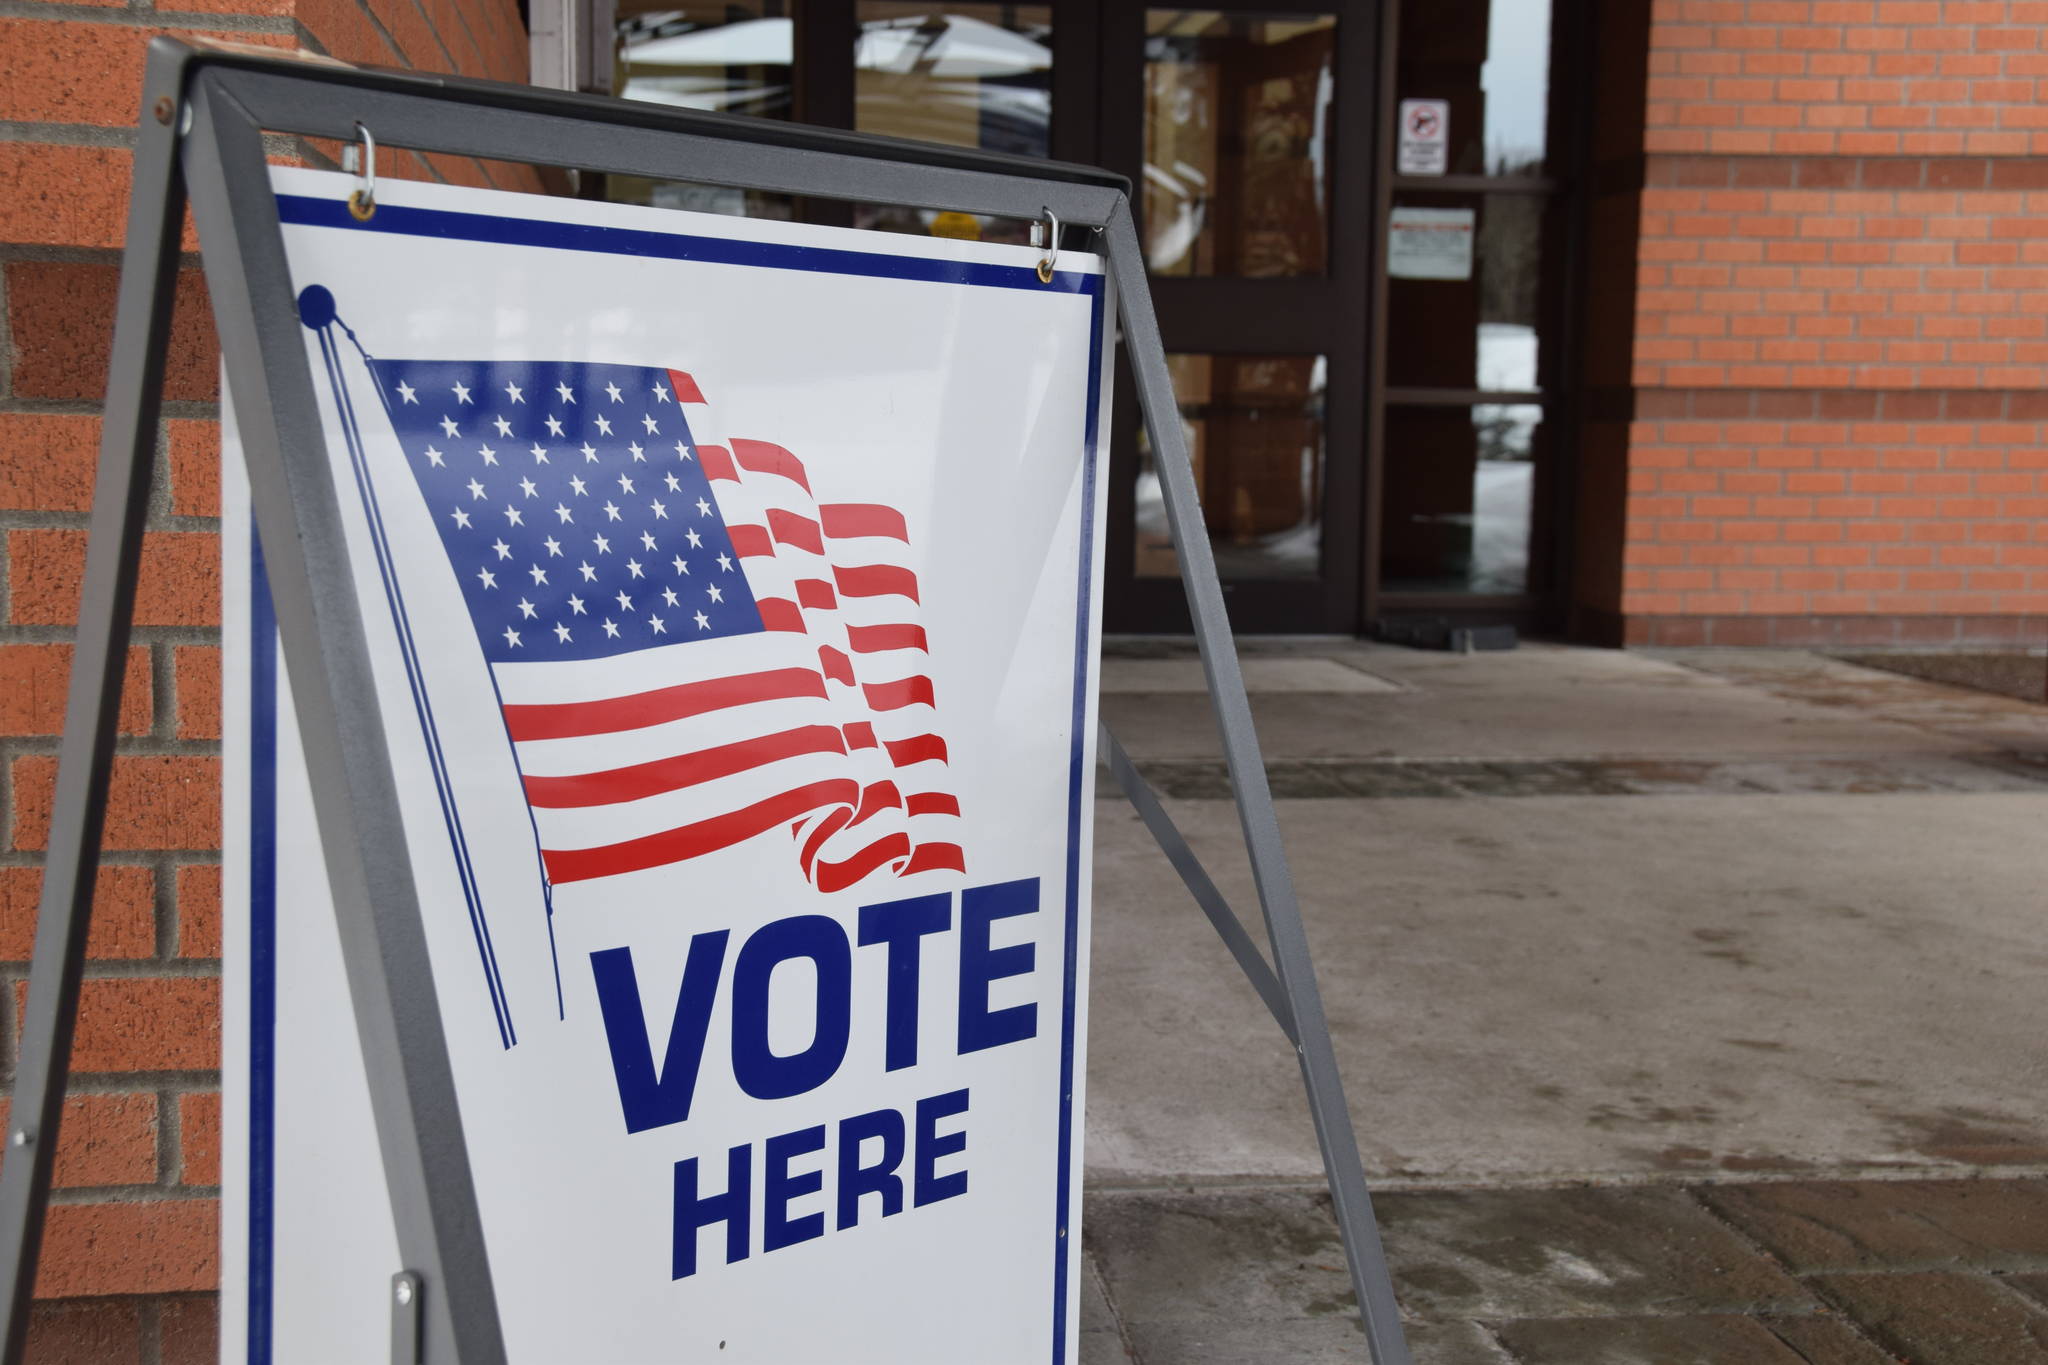 A sign directs voters at Soldotna City Hall during the special Field House election on March 5, 2019. (Photo by Brian Mazurek/Peninsula Clarion)